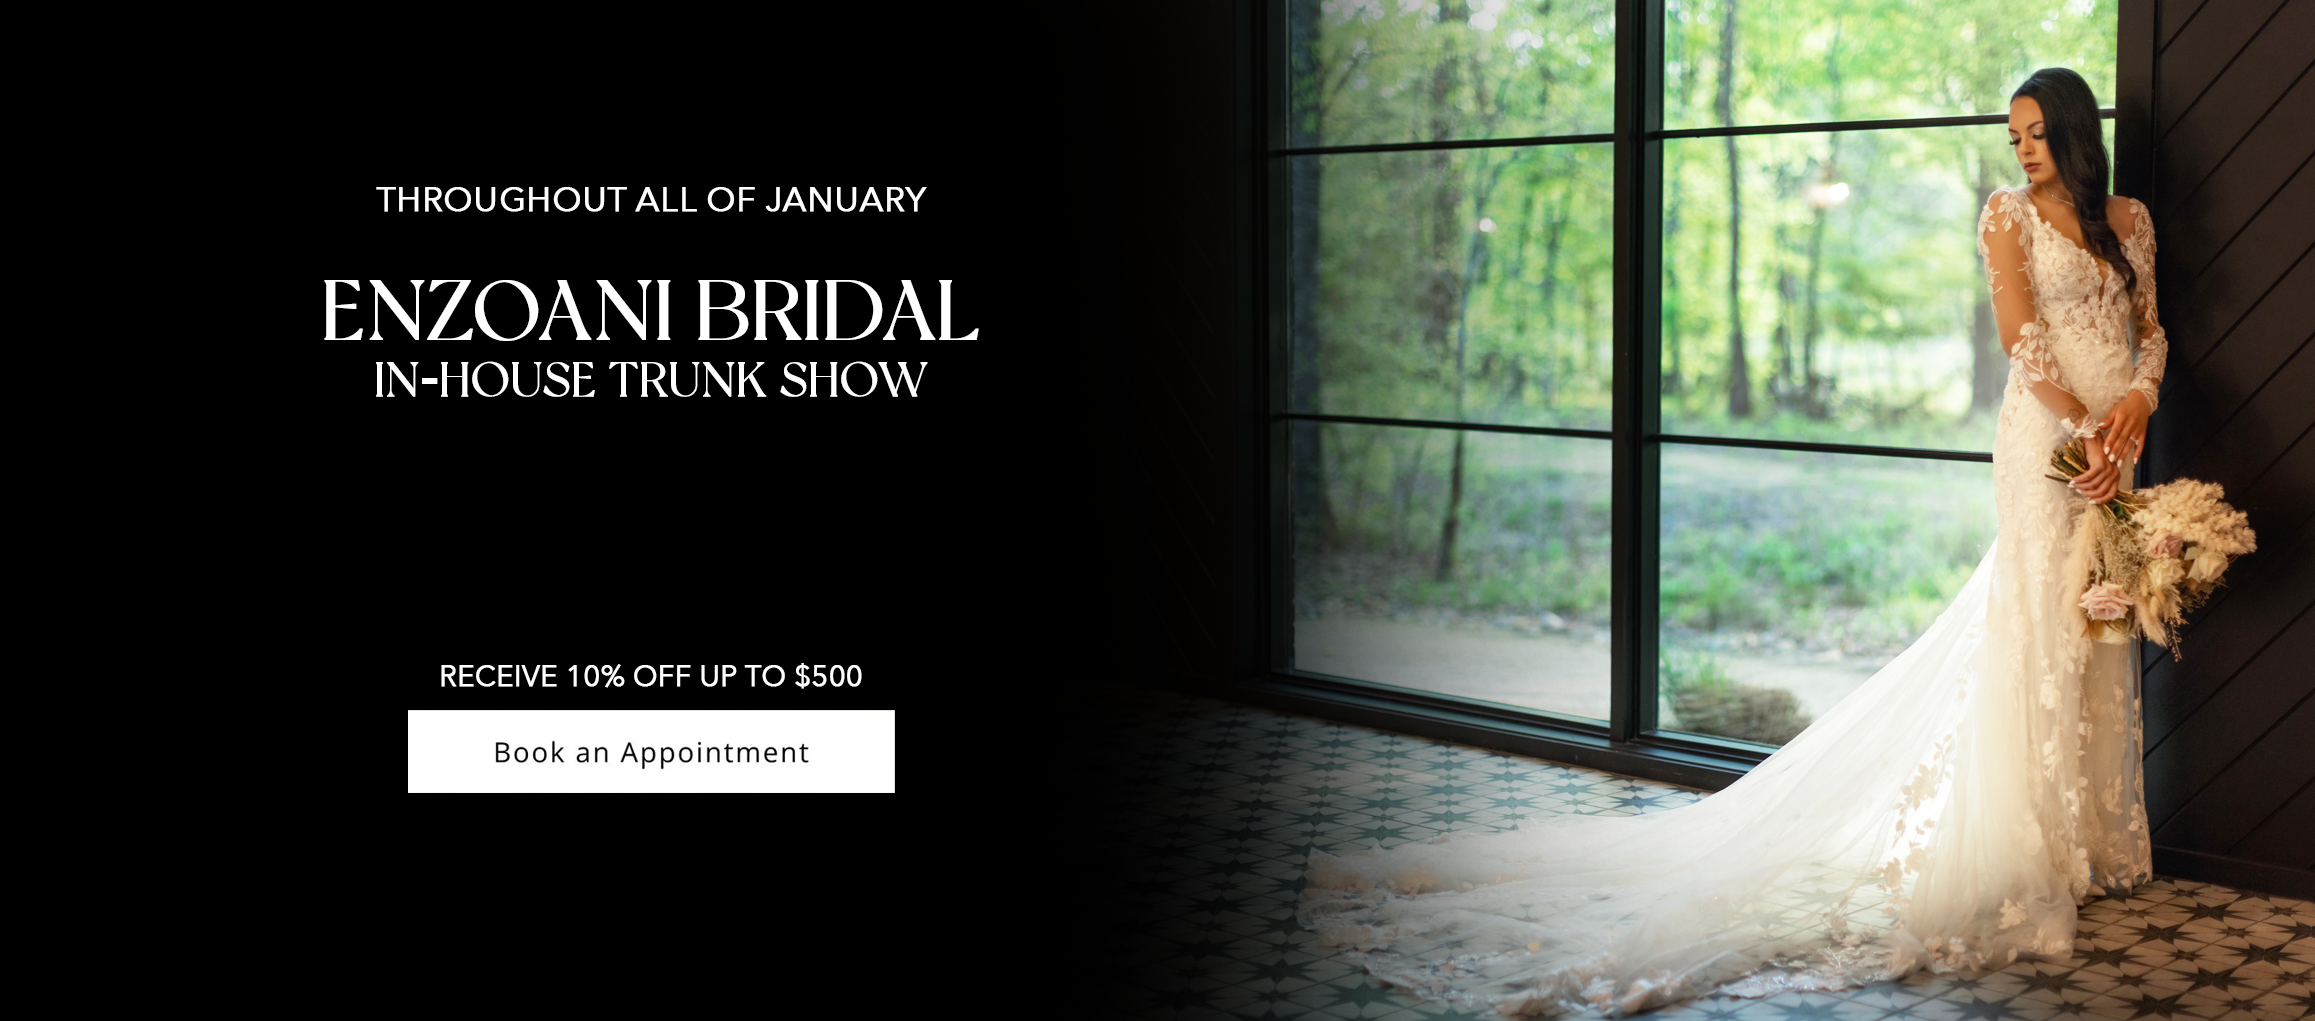 Enzoani Bridal In-House Trunk Show